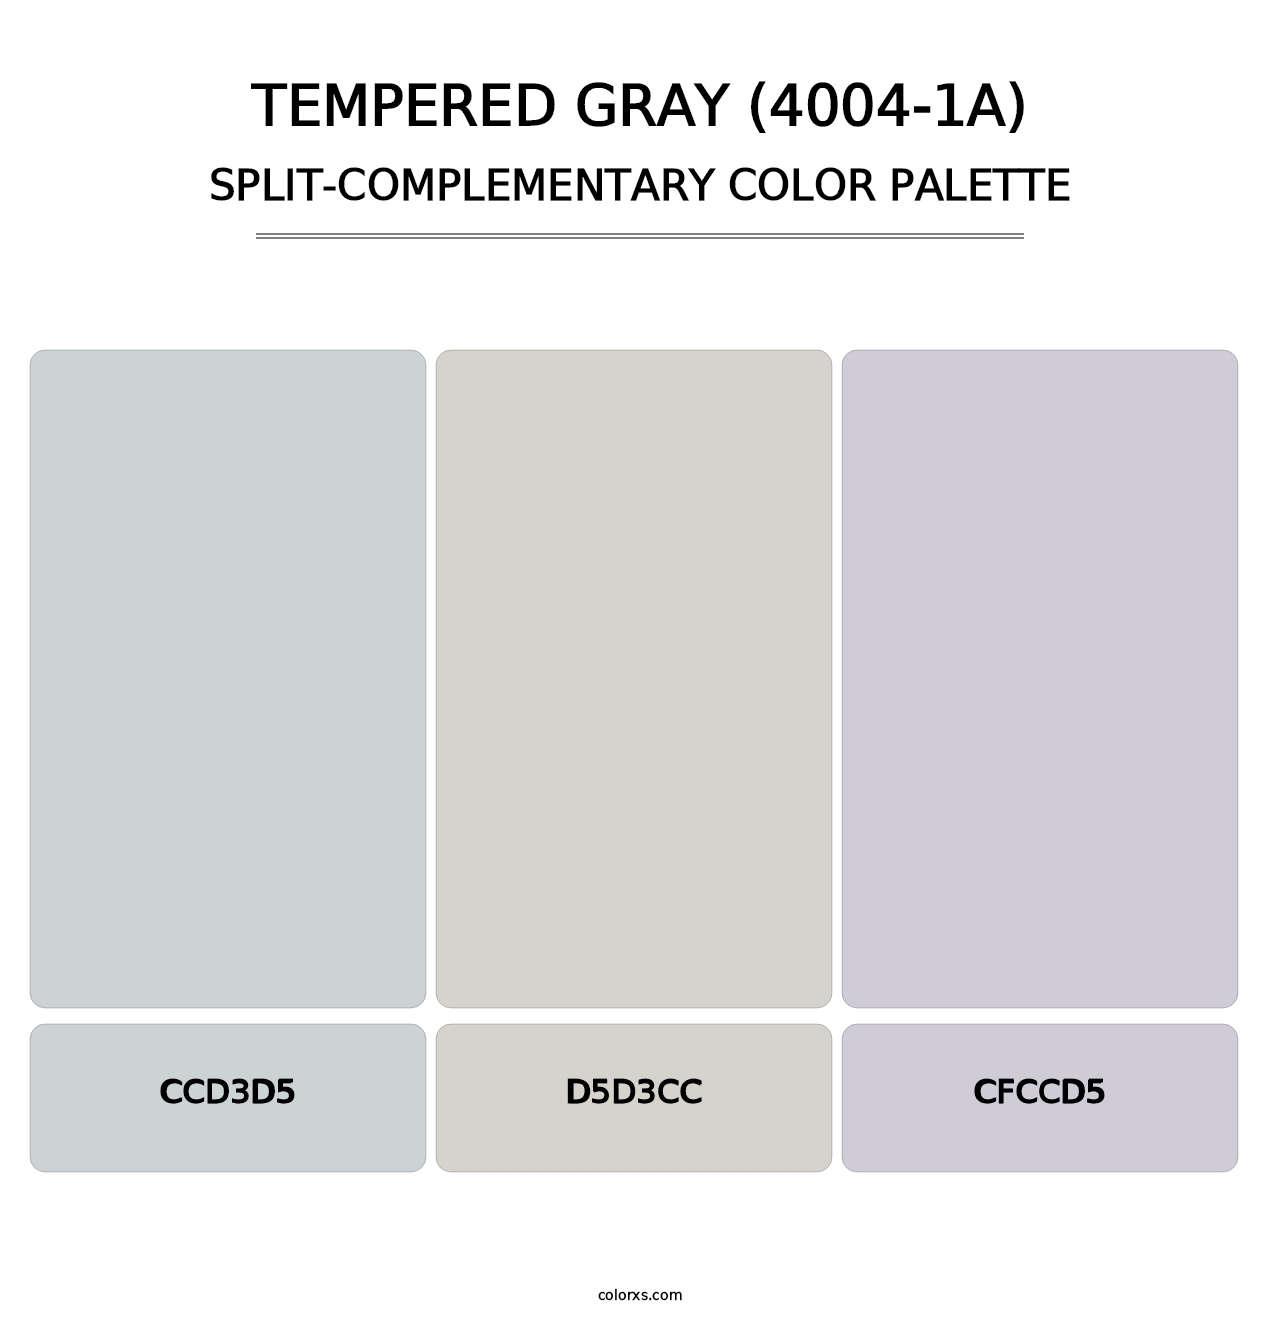 Tempered Gray (4004-1A) - Split-Complementary Color Palette